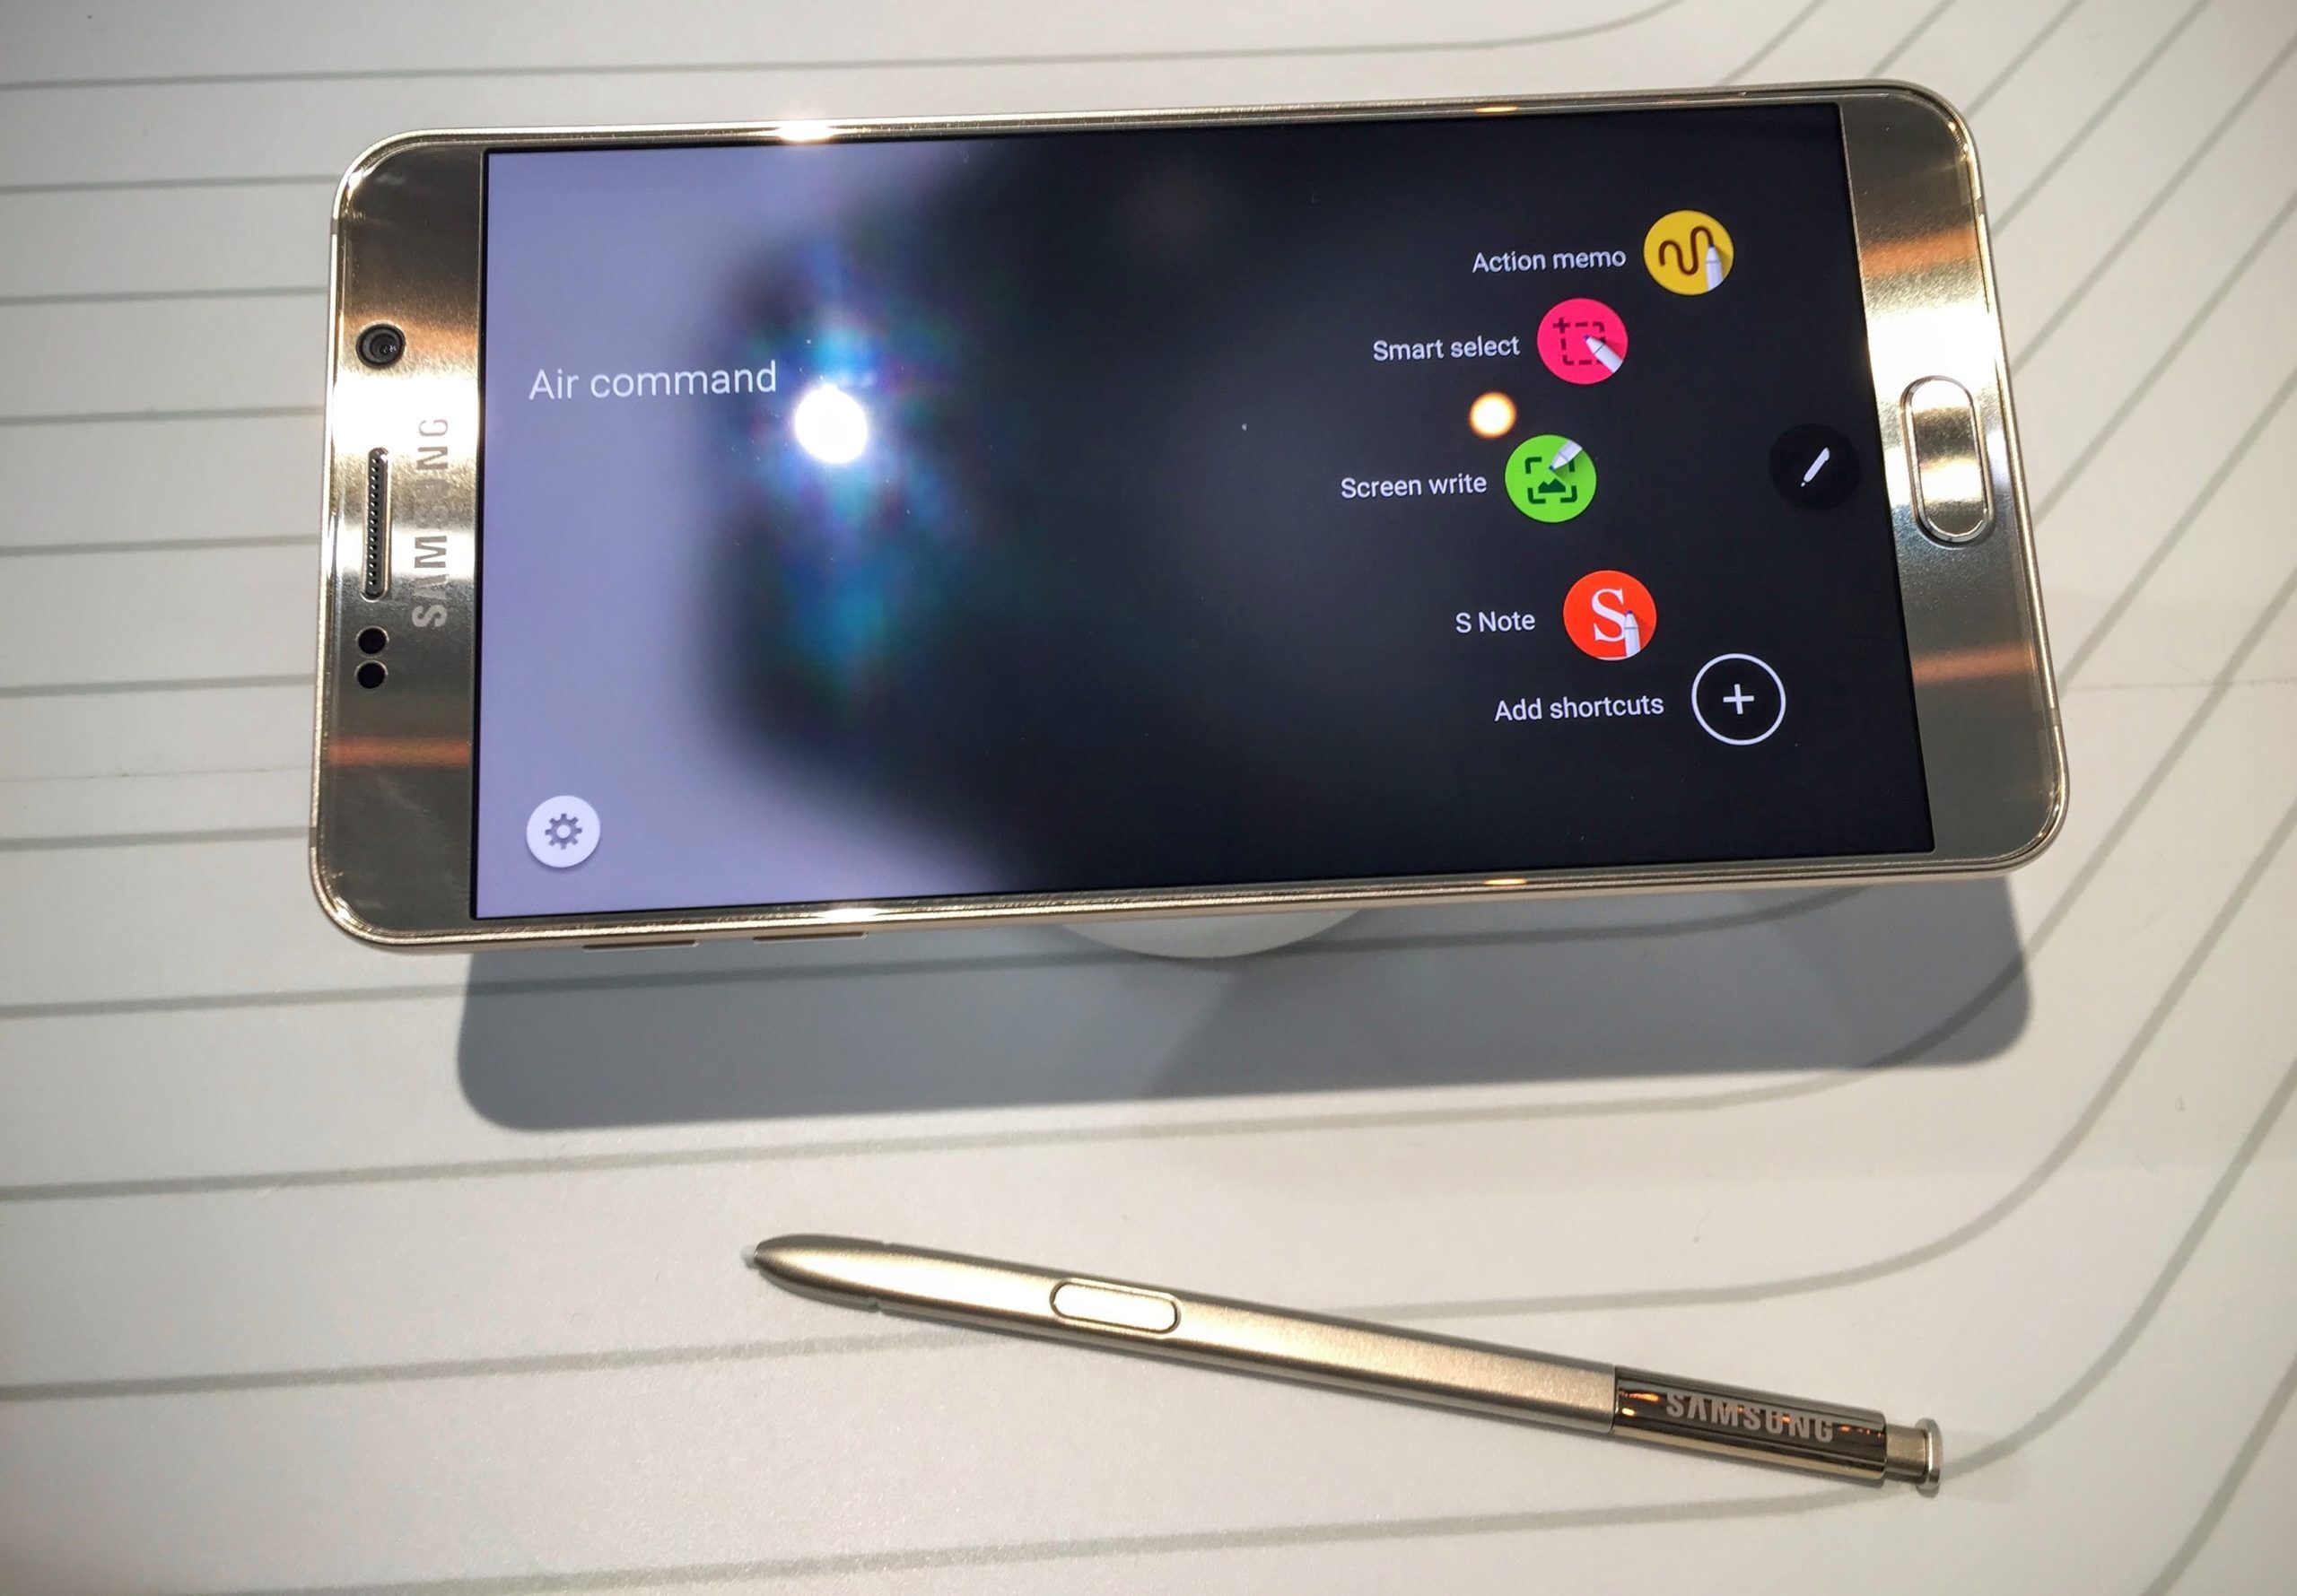 The S Pen clicks into and out of the body of the Note 5 with a press